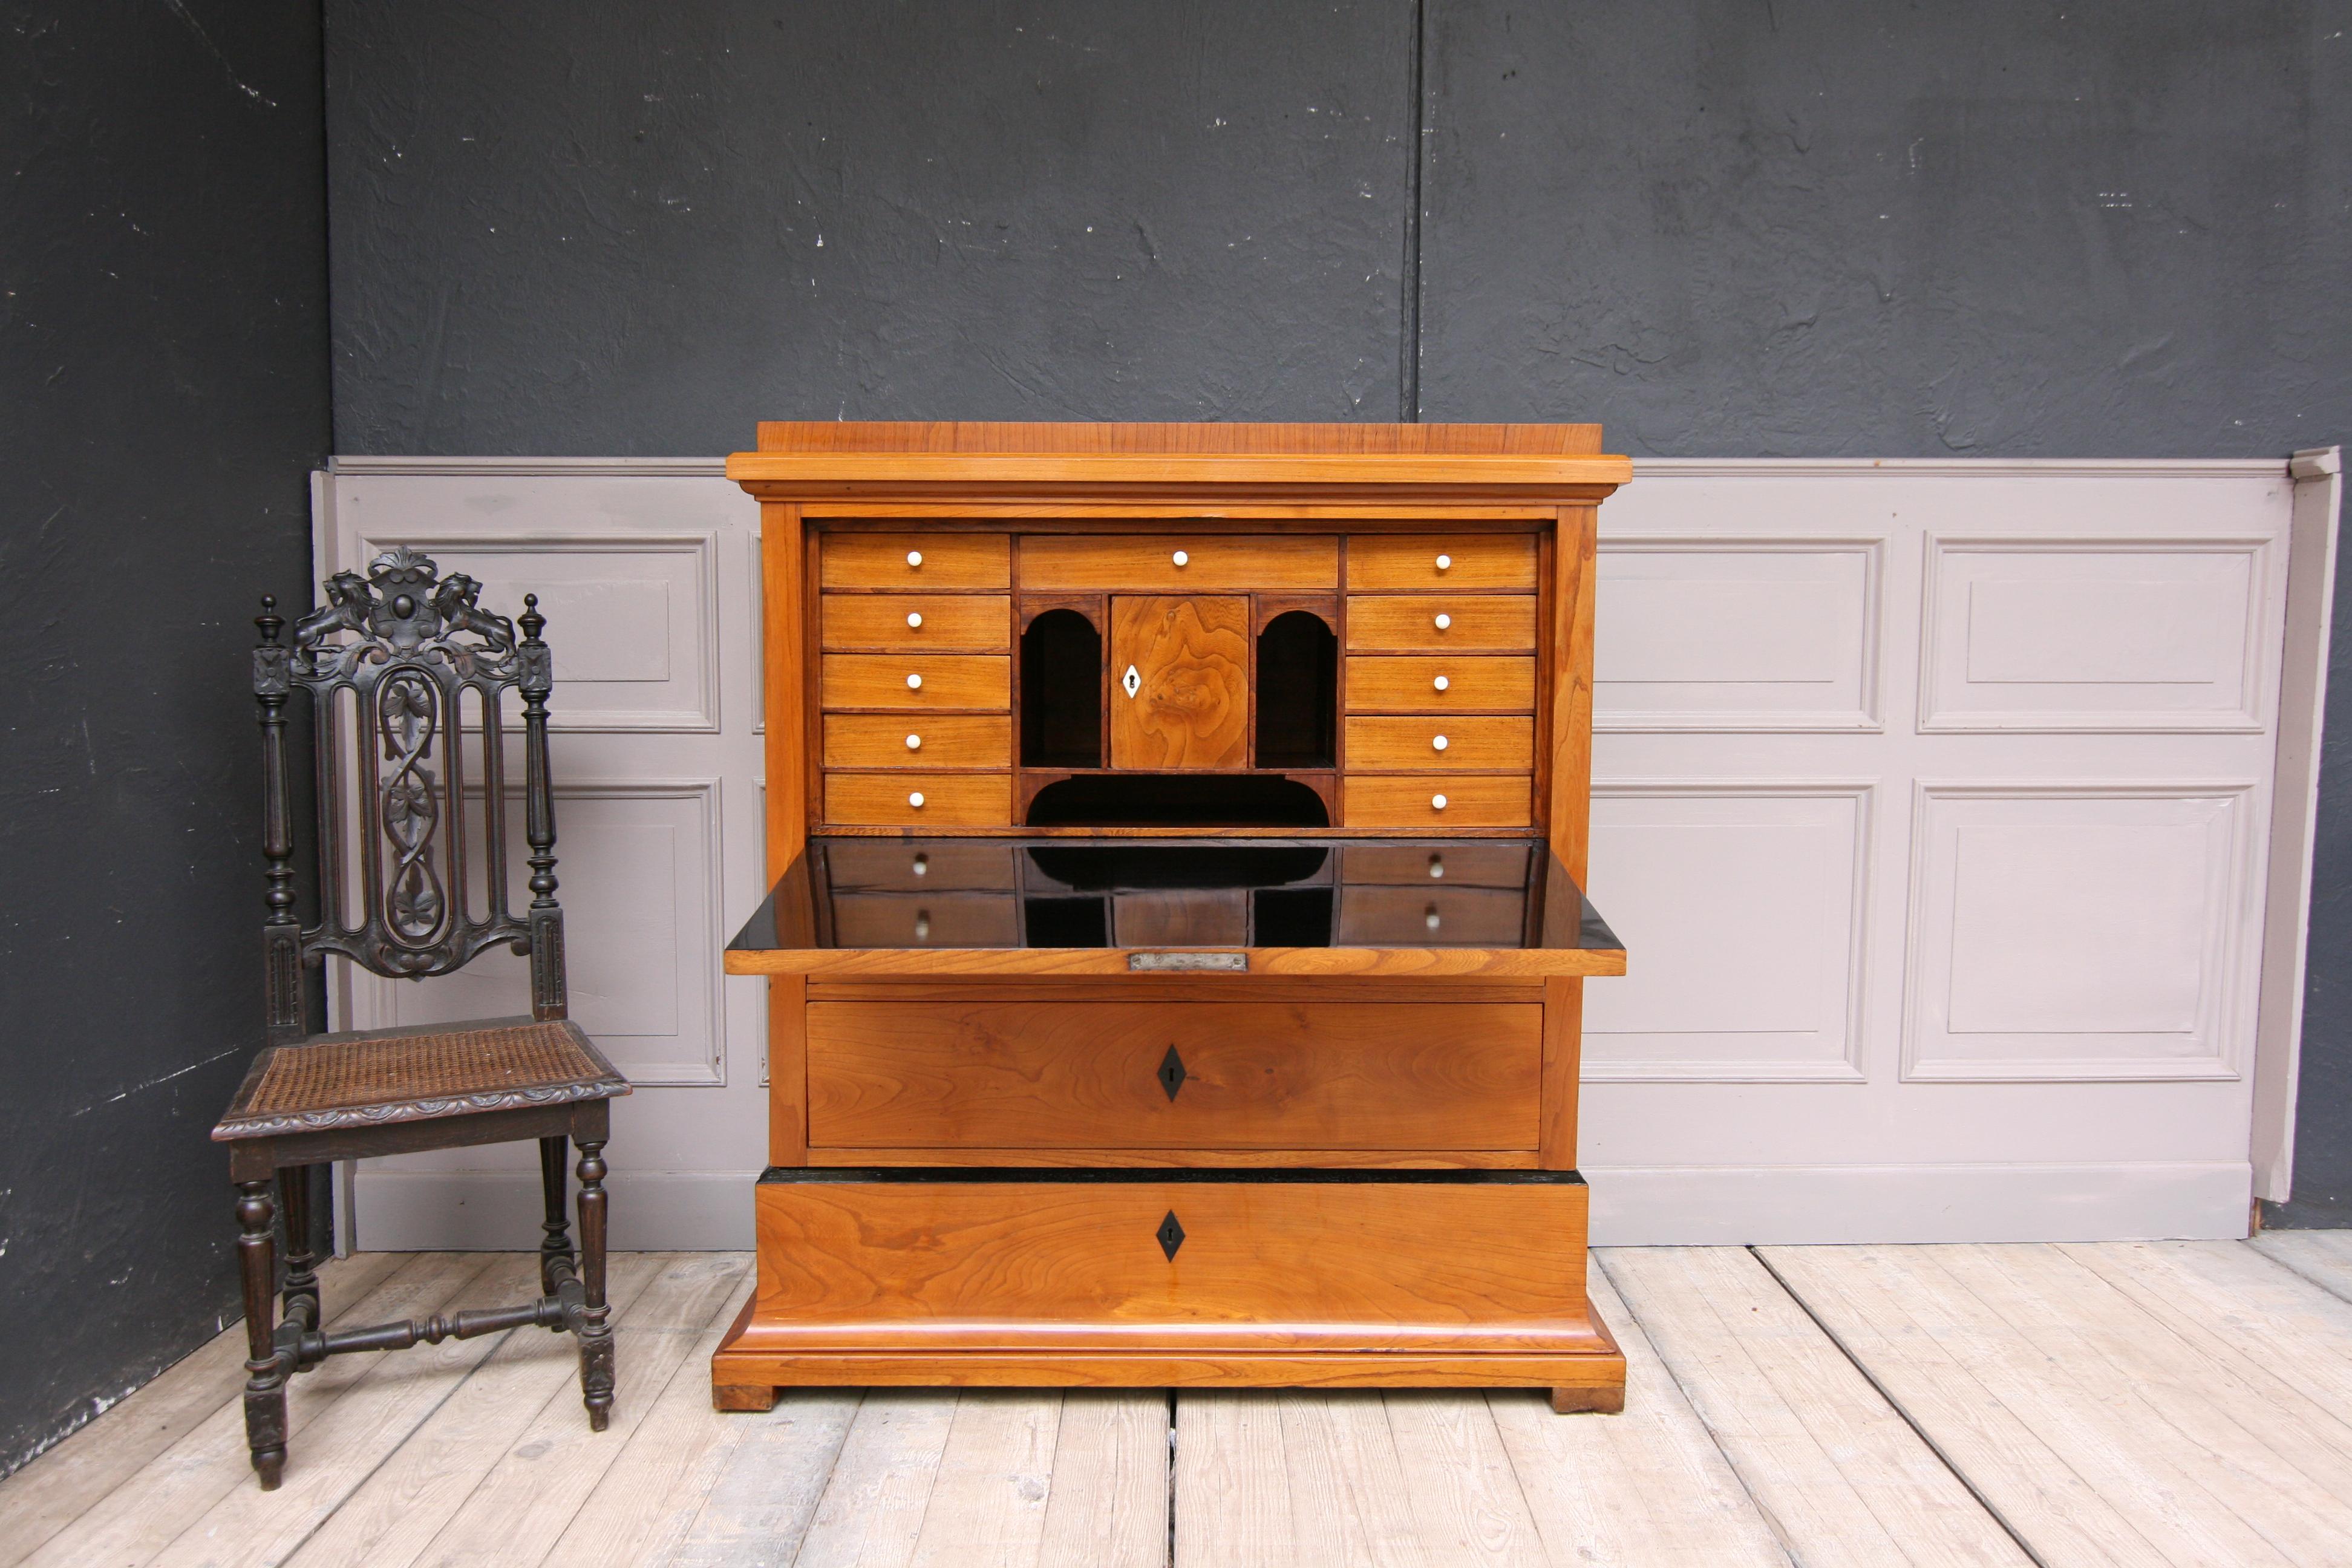 Original Biedermeier secretary from Sweden, circa 1830-1840. Cherrywood veneer. Expertly hand-polished with shellac (French polish).

Half-high body, consisting of the expansive base with a large drawer, and sitting on it the main part with 2